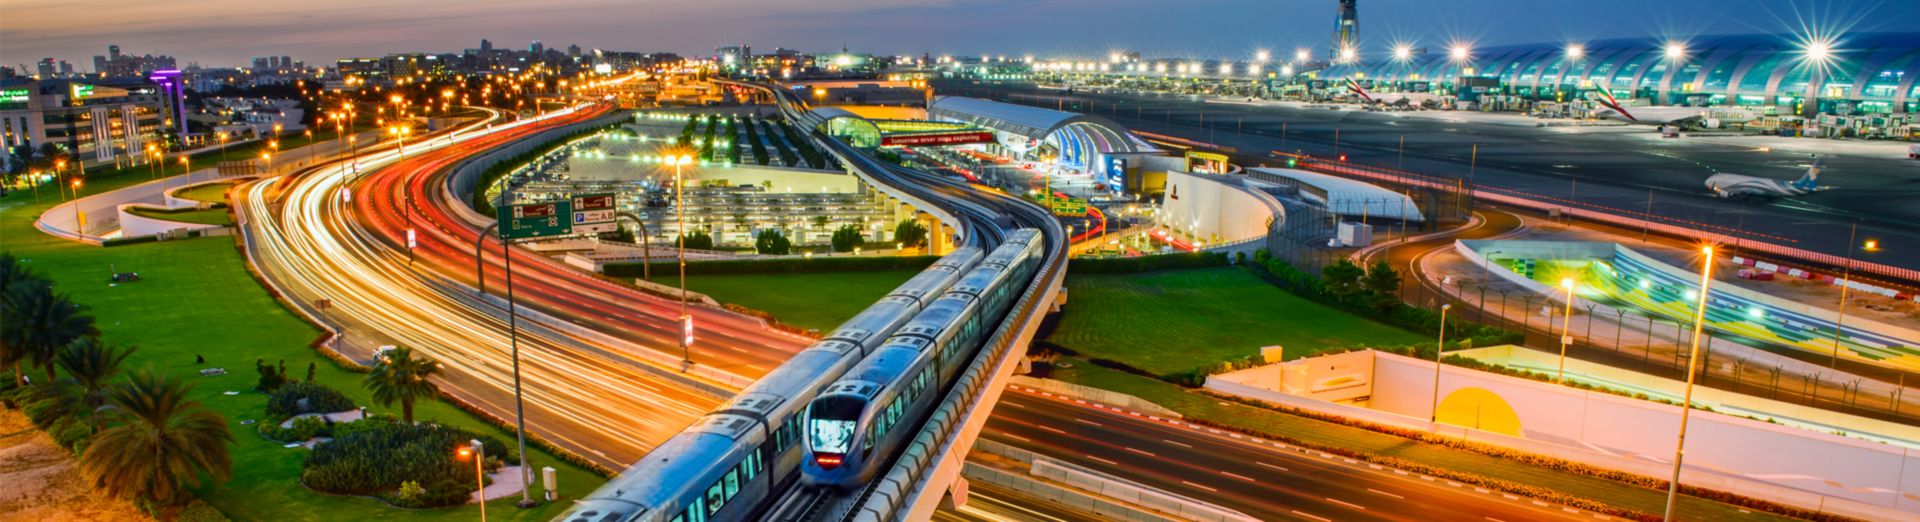 Image of metro trains crossing each other in Dubai